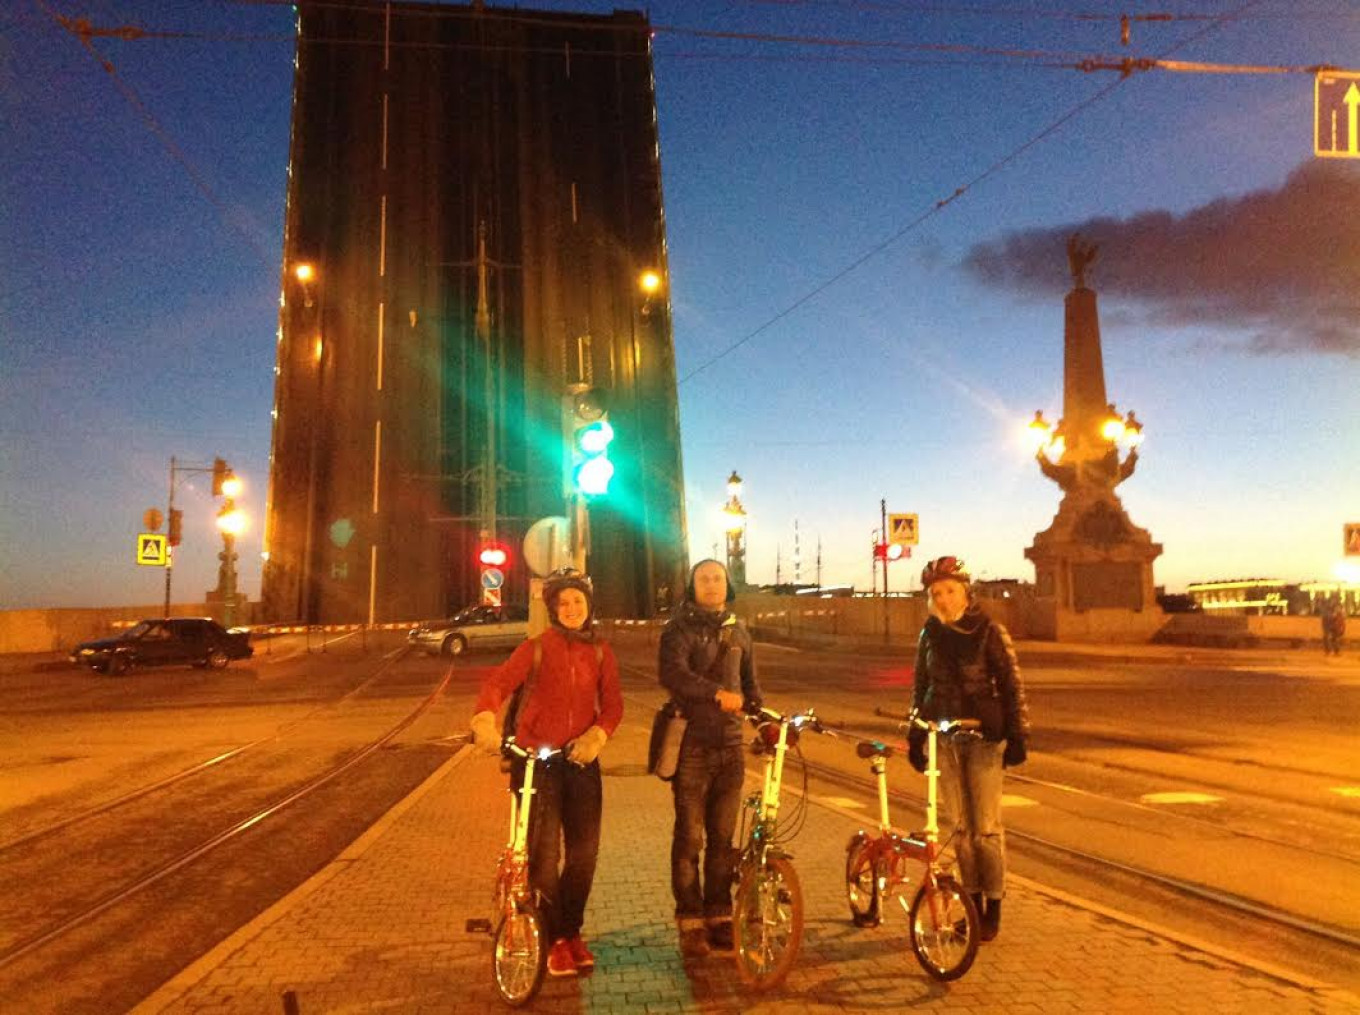 
					A nocturnal bike tour is a chance to see the city as you've never seen it before.					 					PETERS WALK				